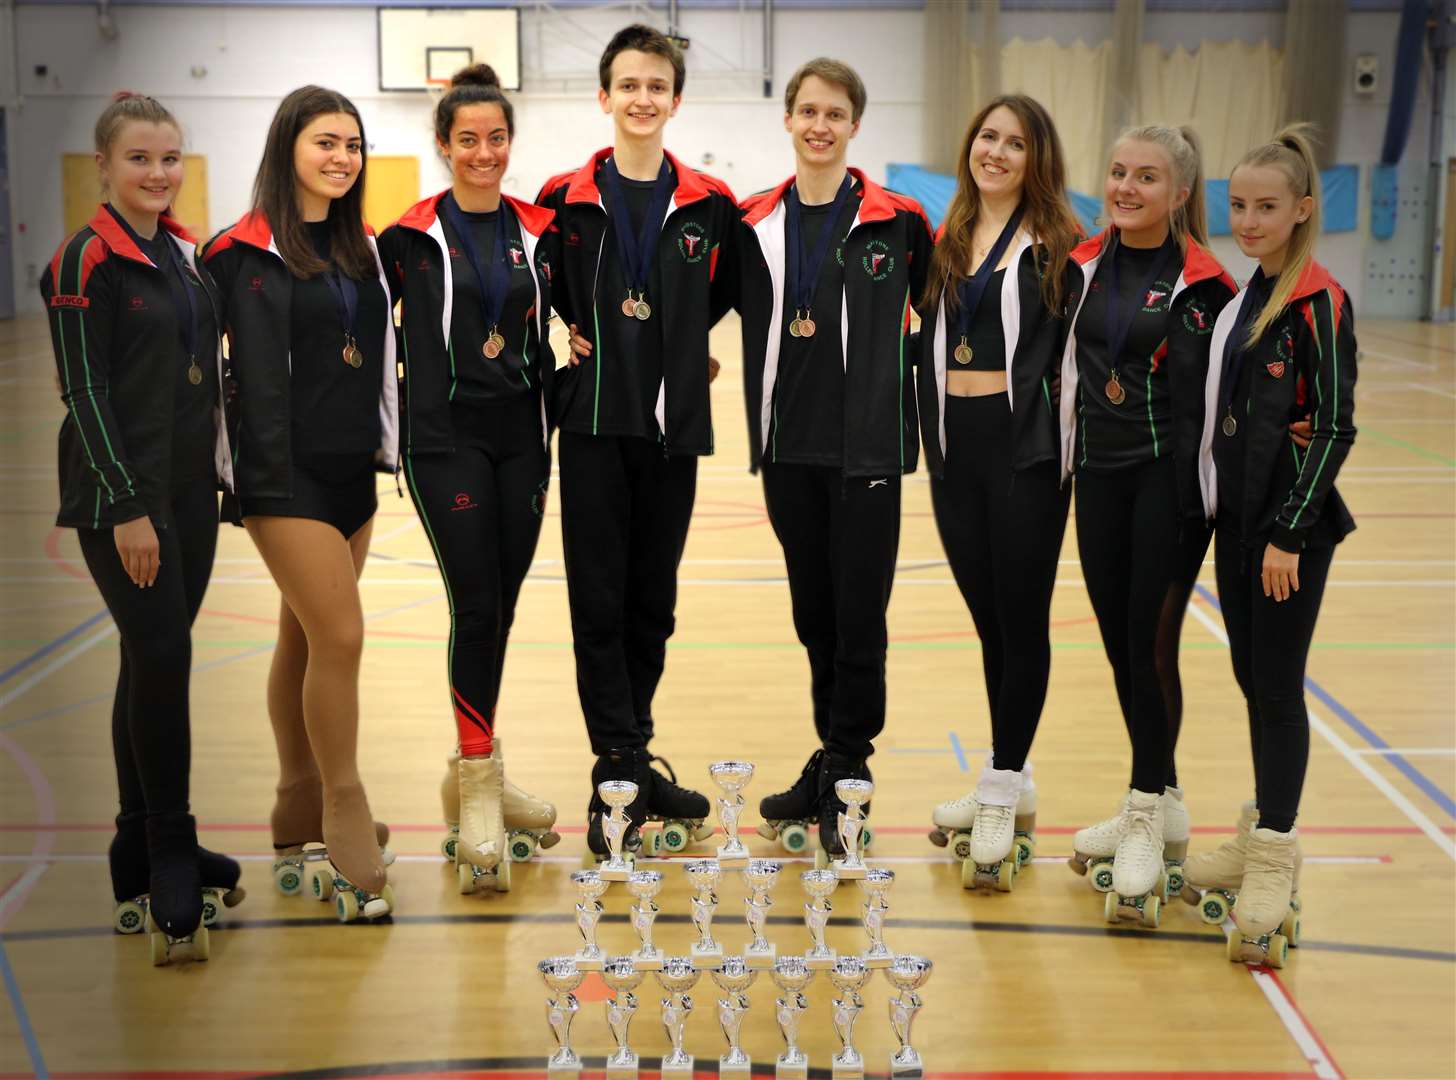 Success for the Maidstone Roller Dance Club in Kettering